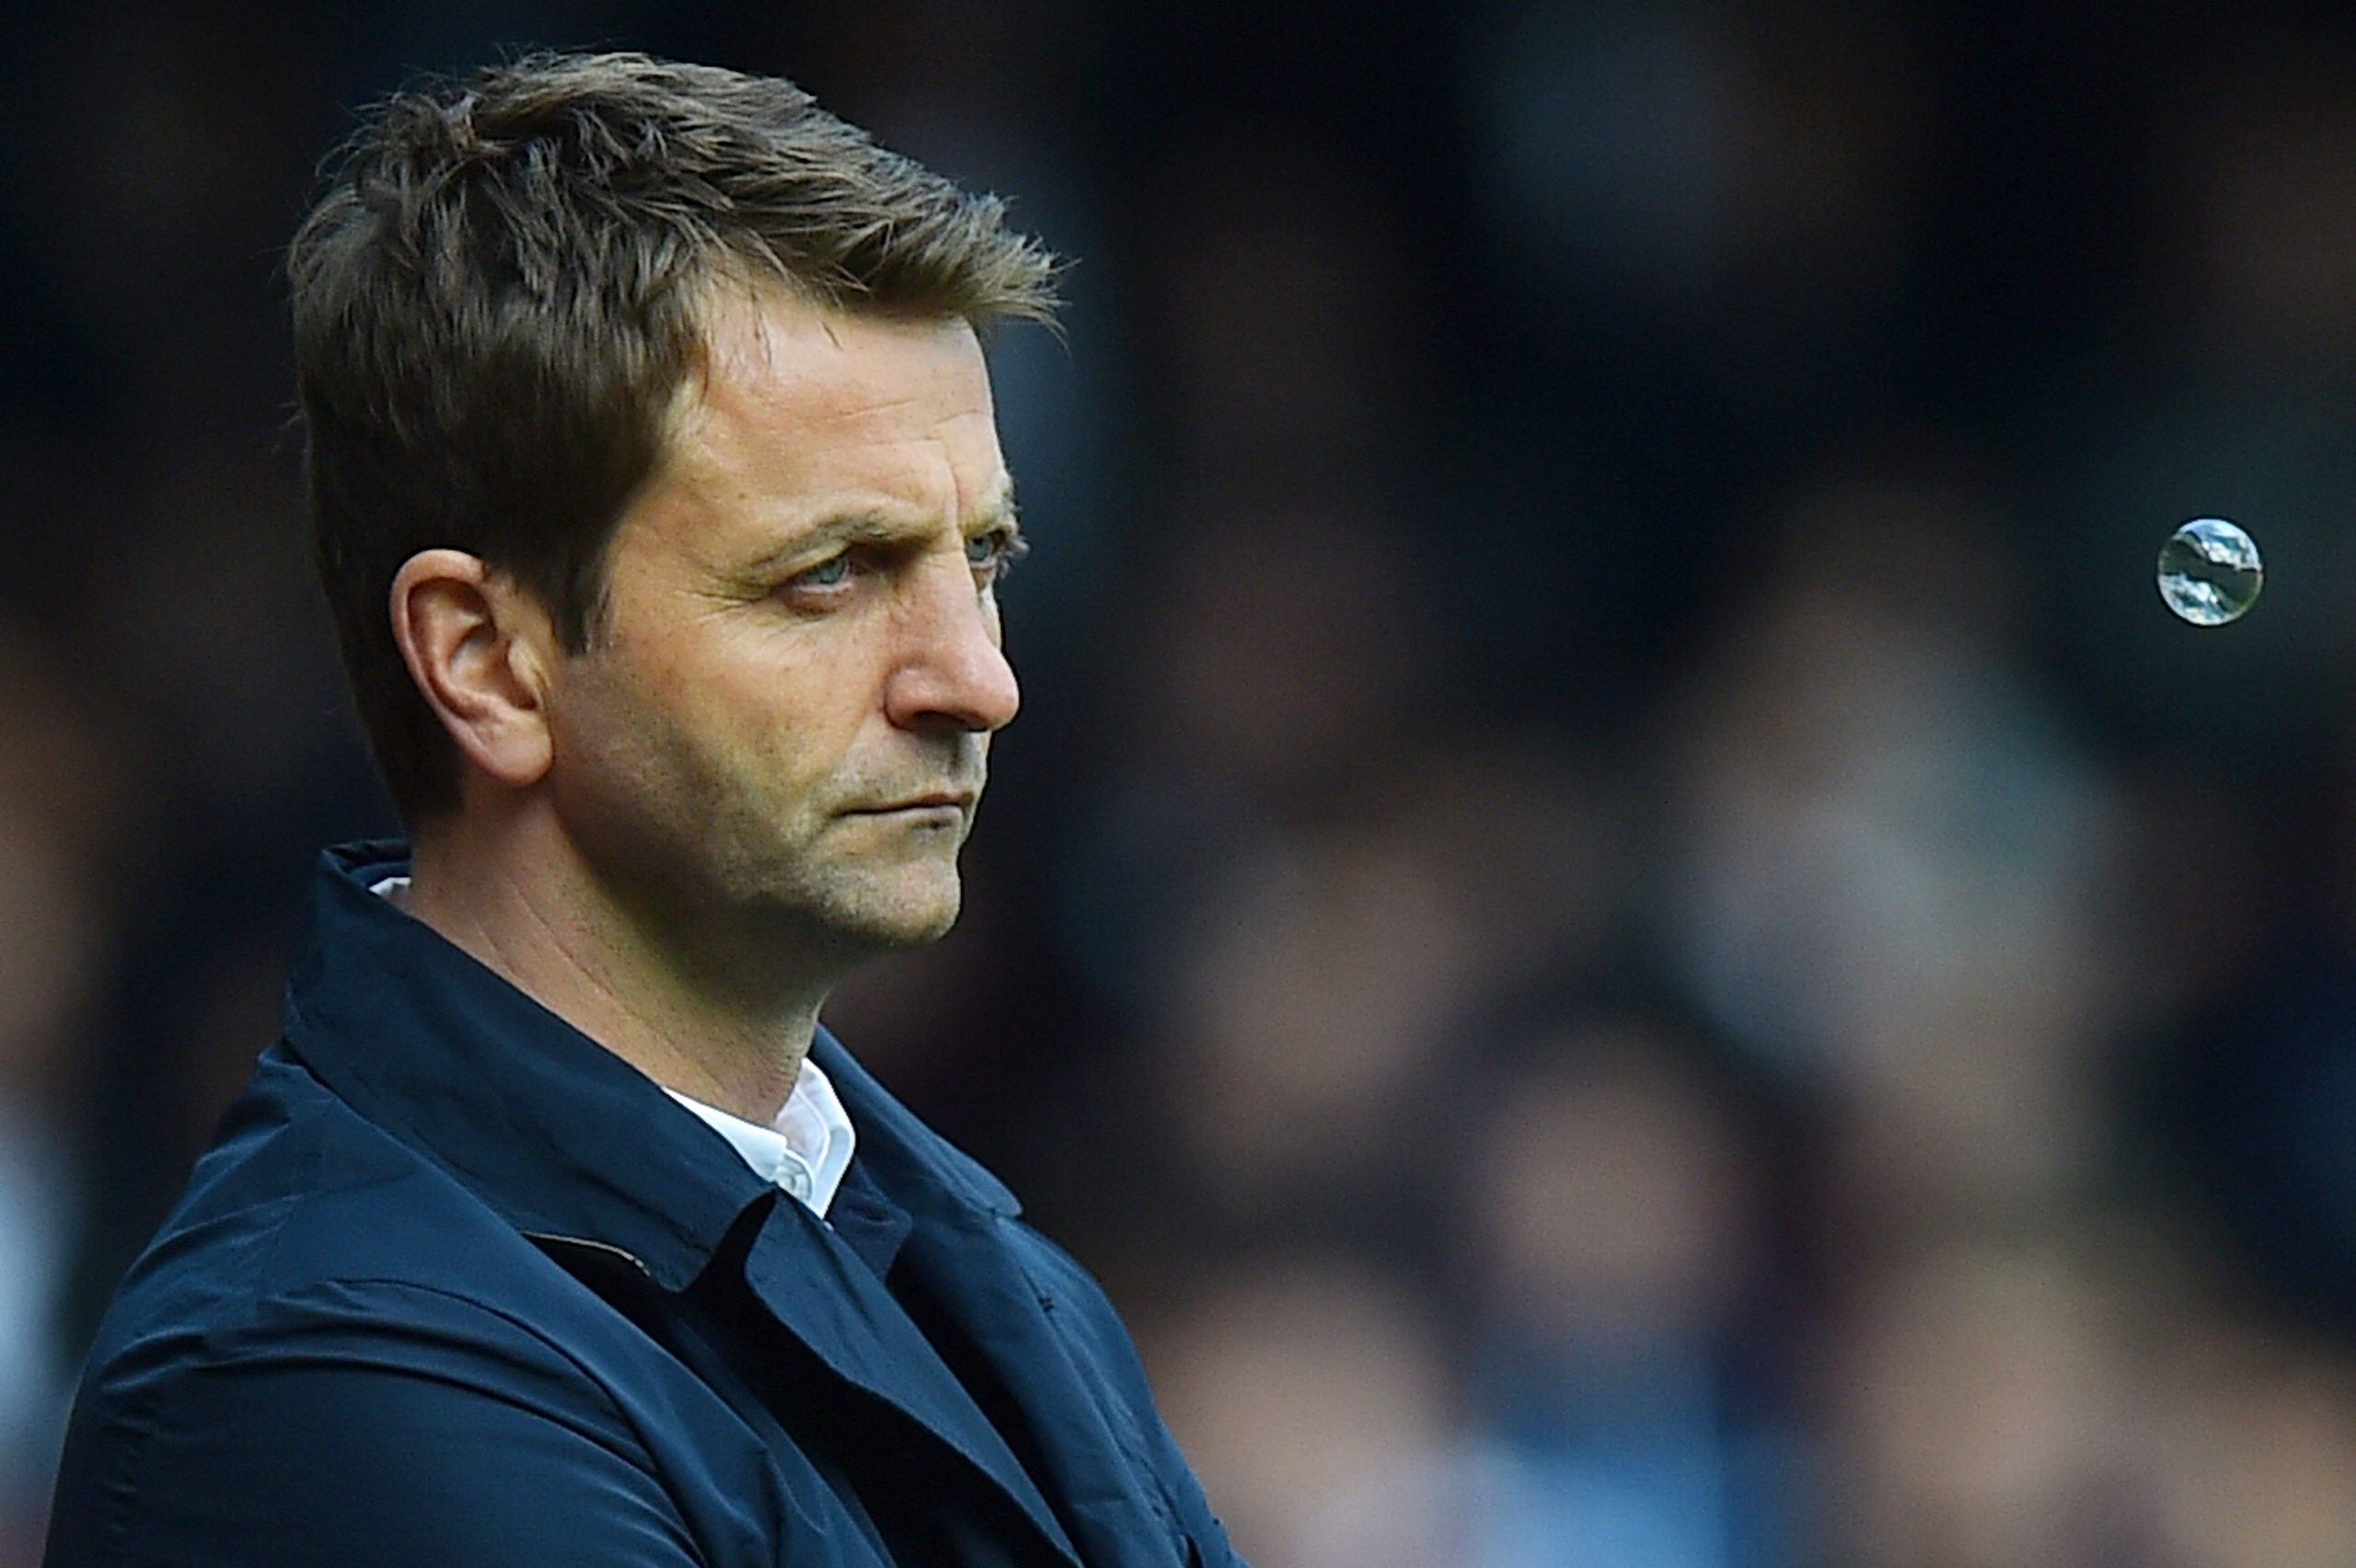 Tim Sherwood during his time as the manager of Tottenham Hotspur.